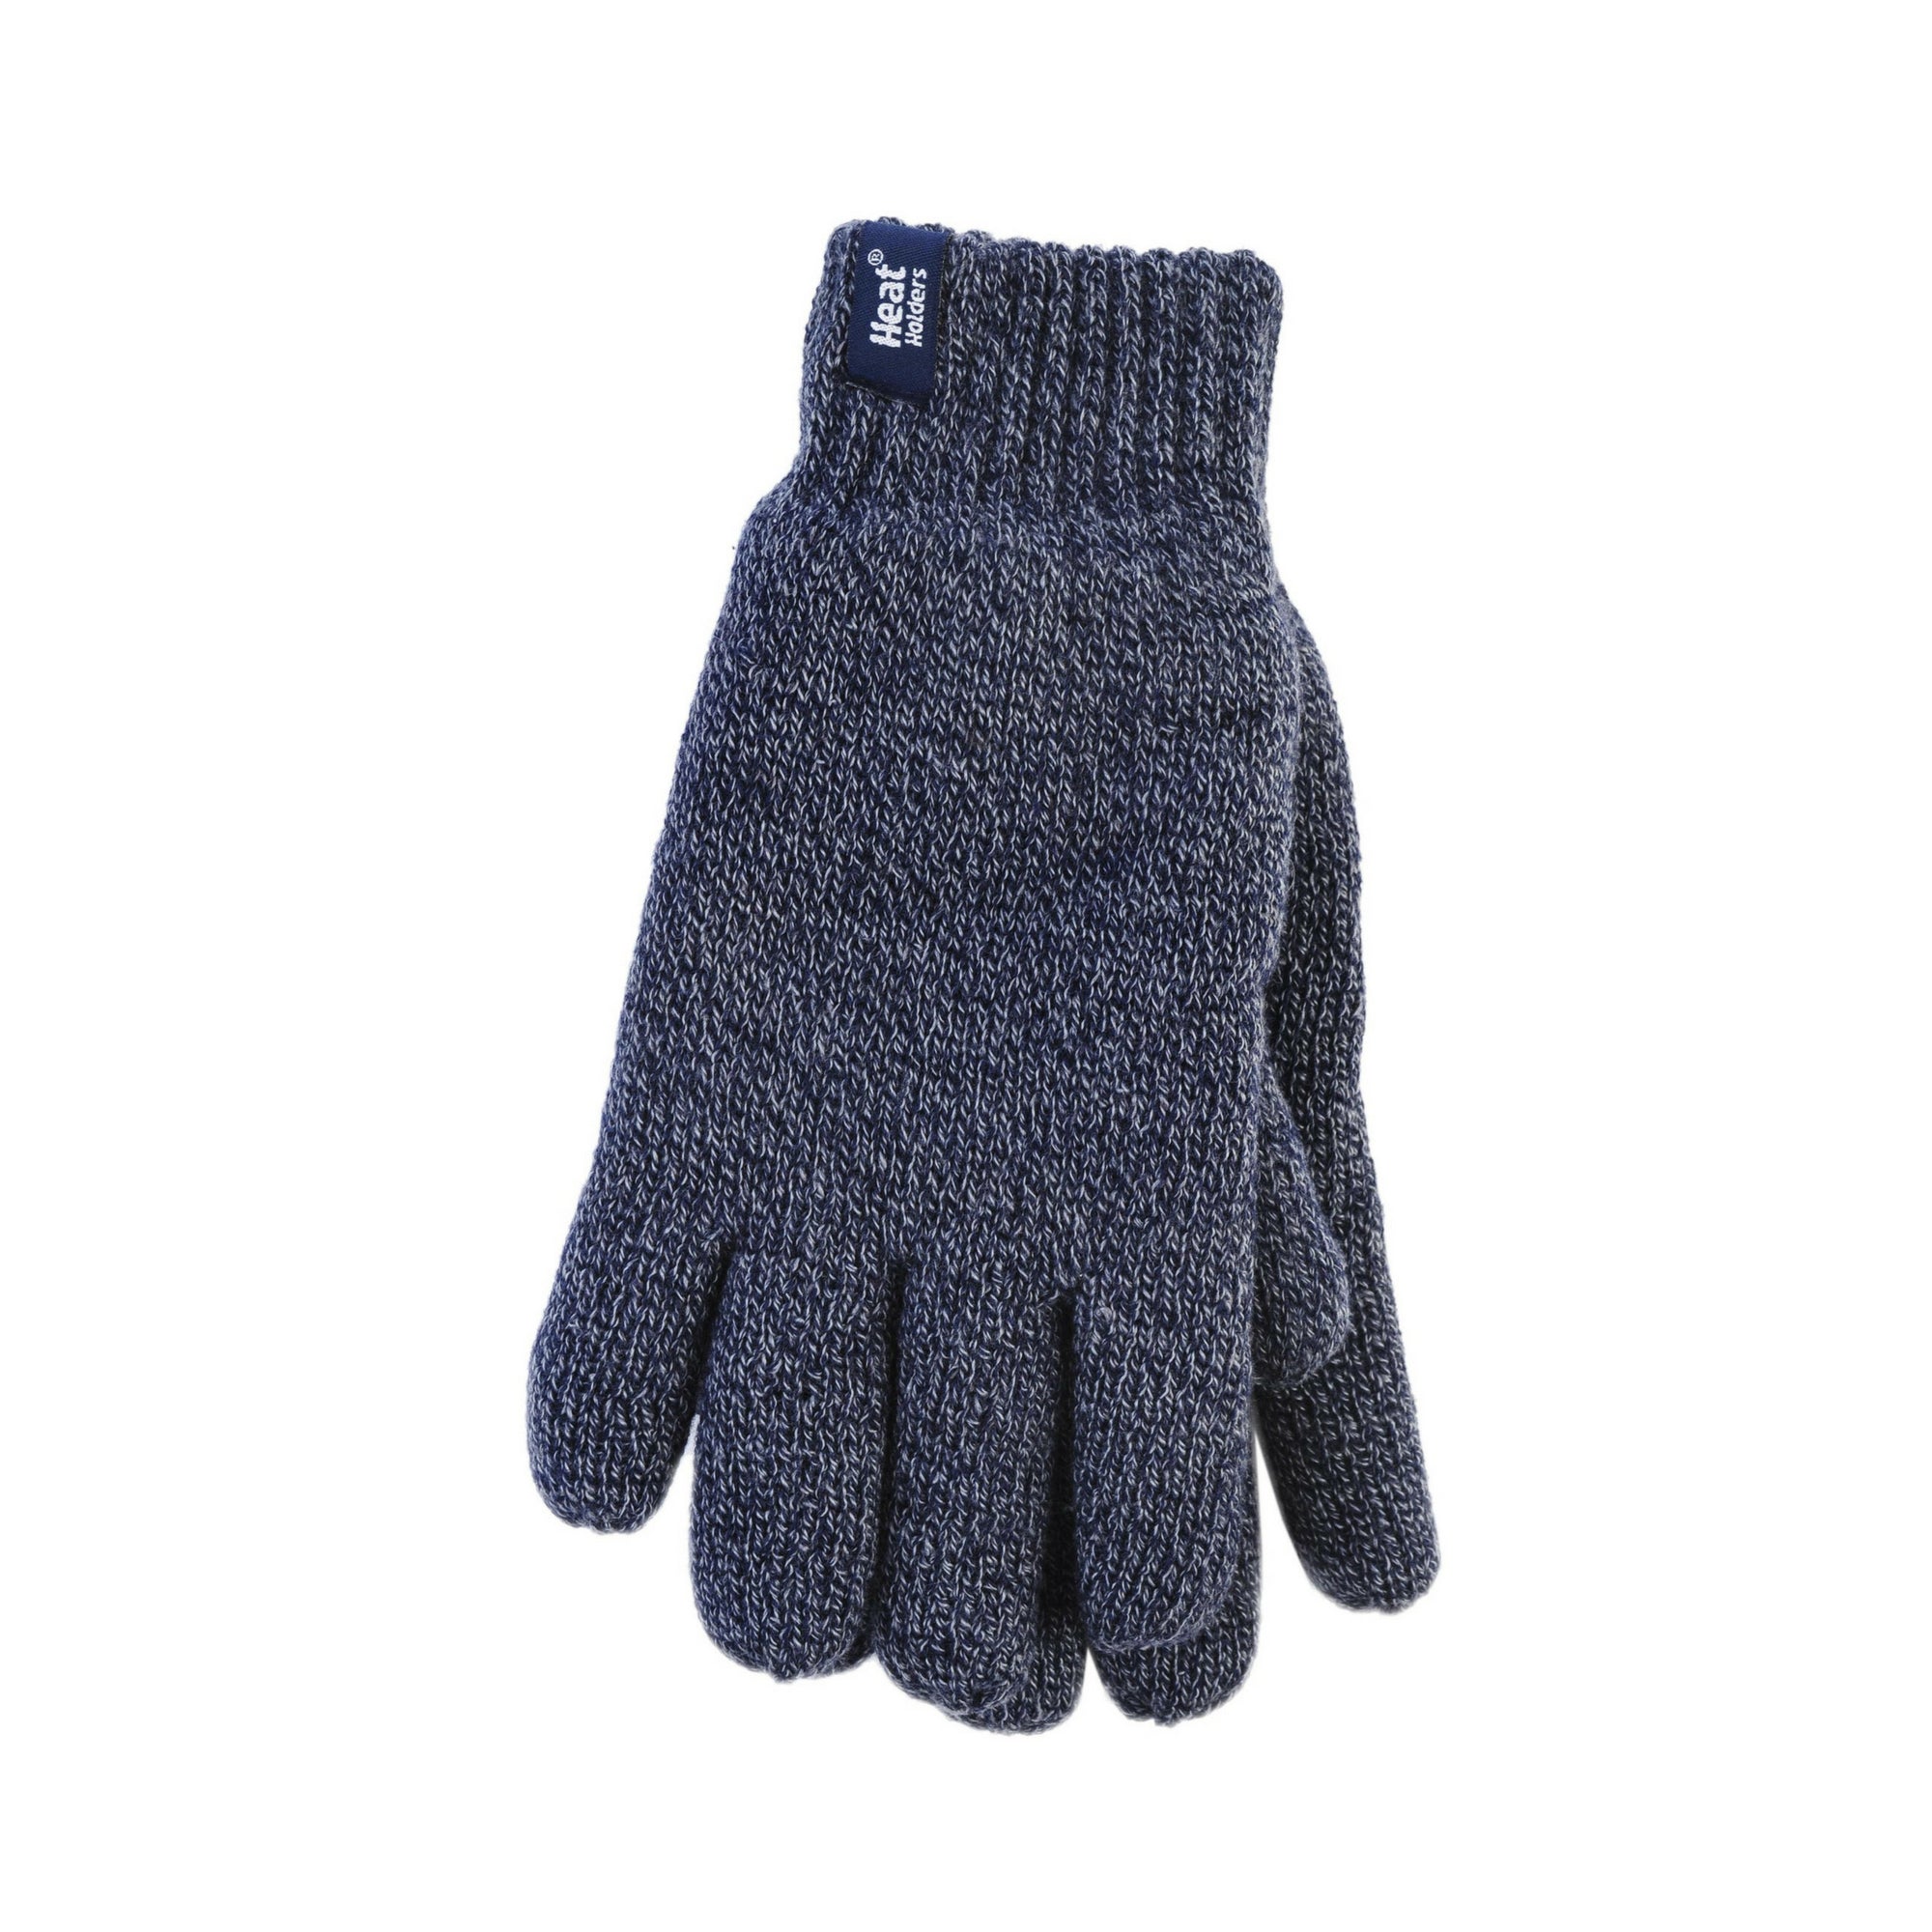 Heat Holders Men's Thermal Gloves With Plush Thermal Lining